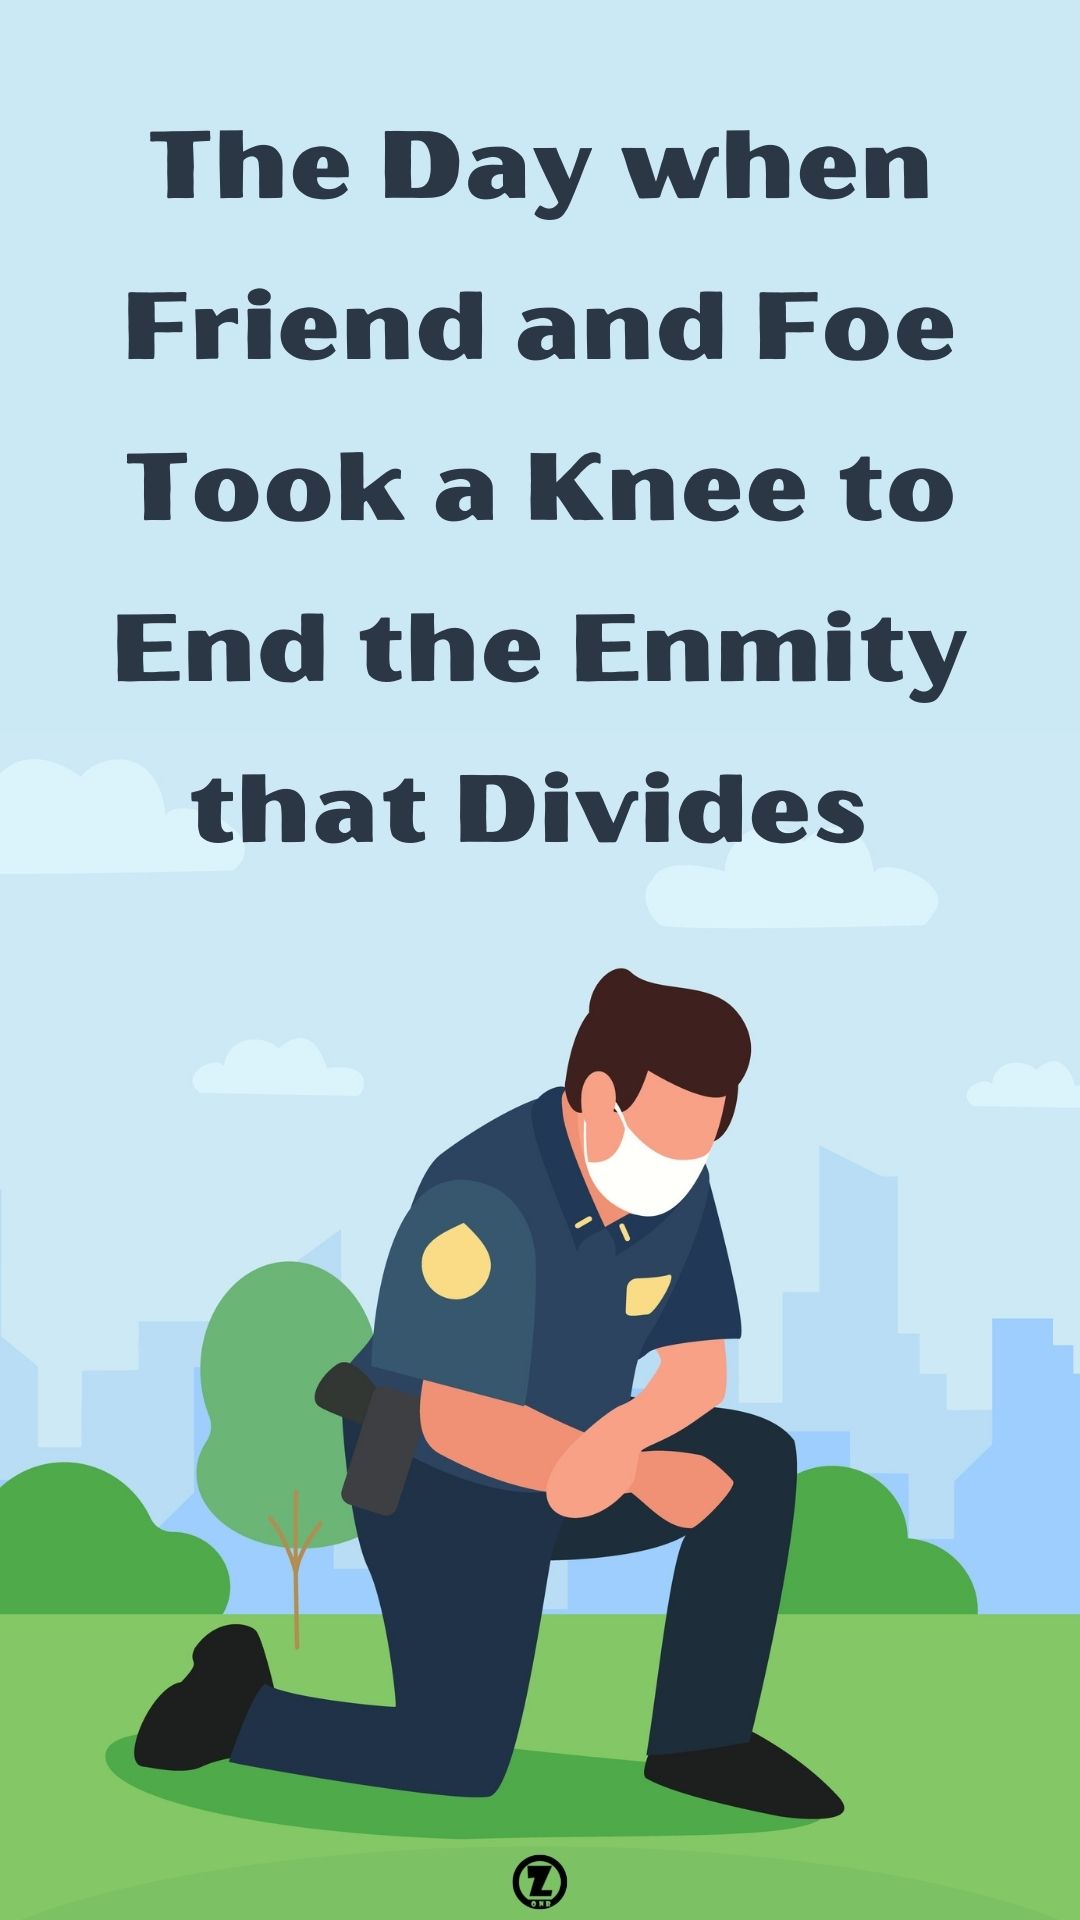 You are currently viewing The Day when Friend and Foe Took a Knee to End the Enmity that Divides – Step 3